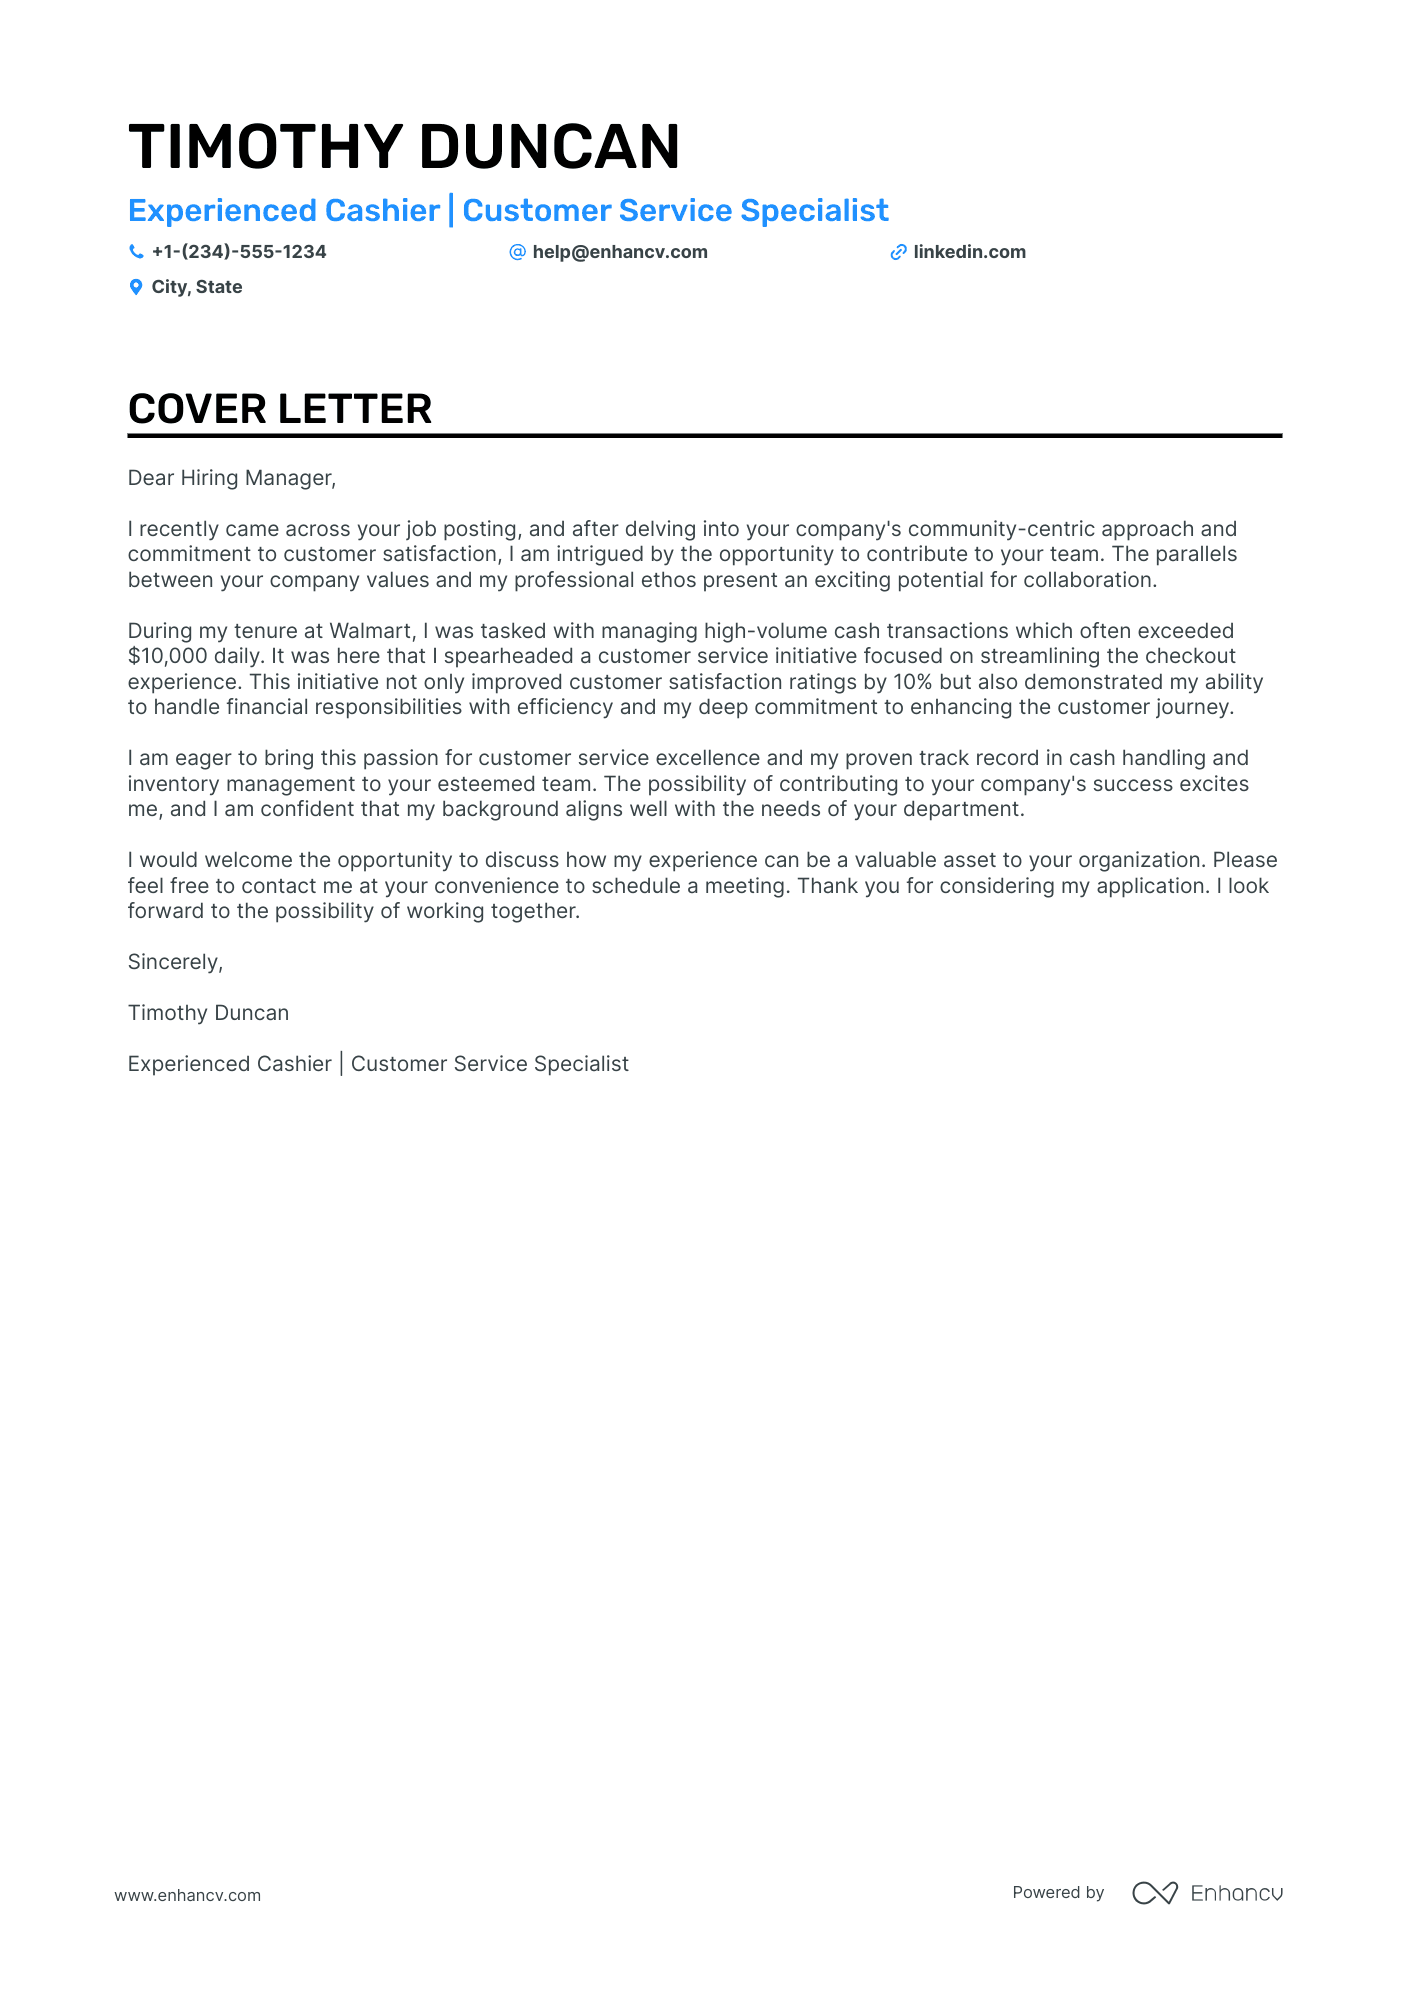 sample application letter for cashier position with no experience